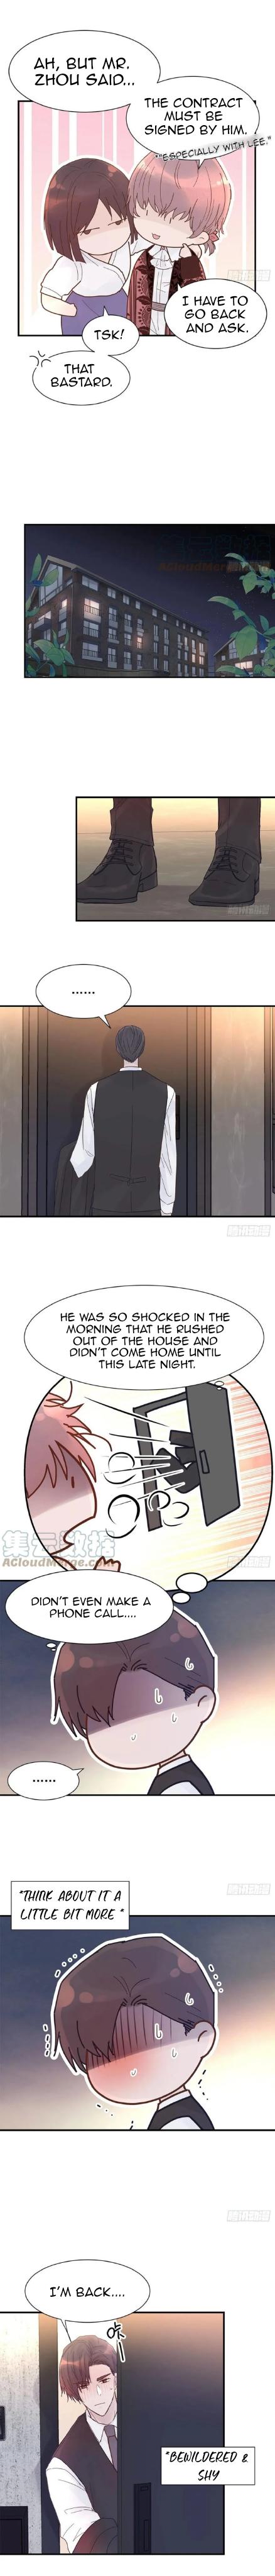 A Tough First Love - Page 3